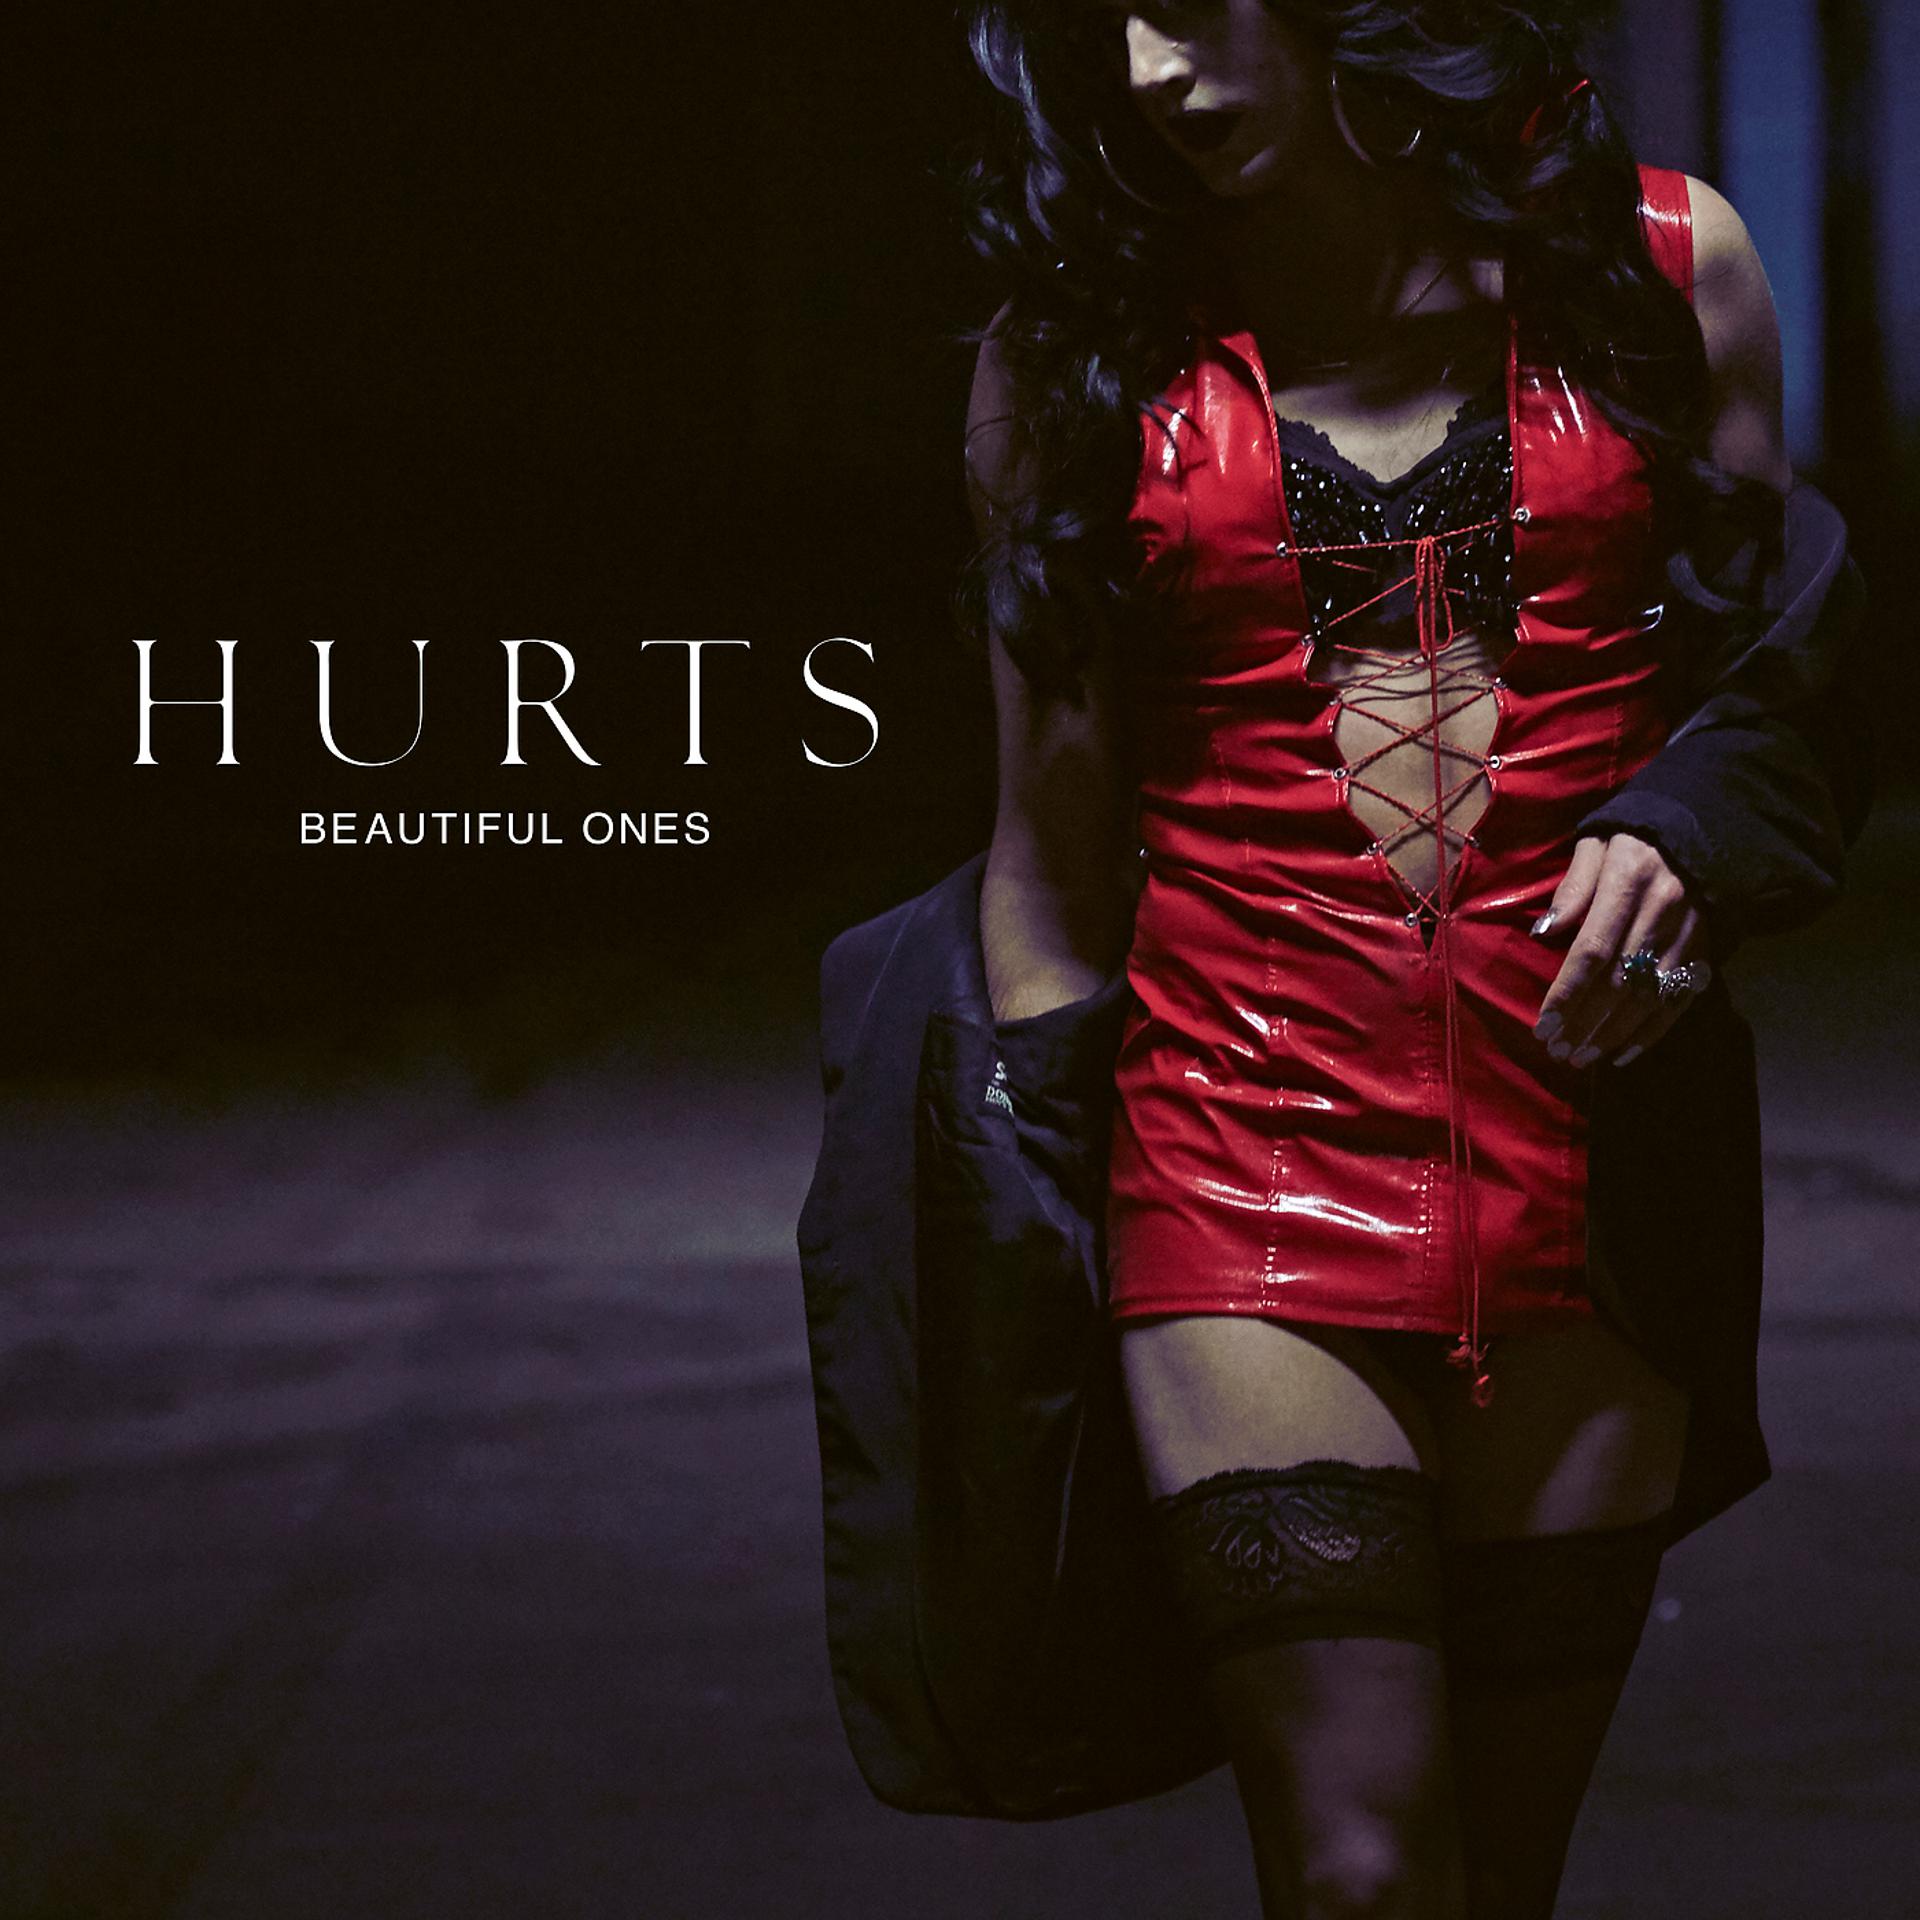 We are beautiful ones. Hurts beautiful ones. The beautiful ones. Hurts beautiful ones клип. Амелии hurts.